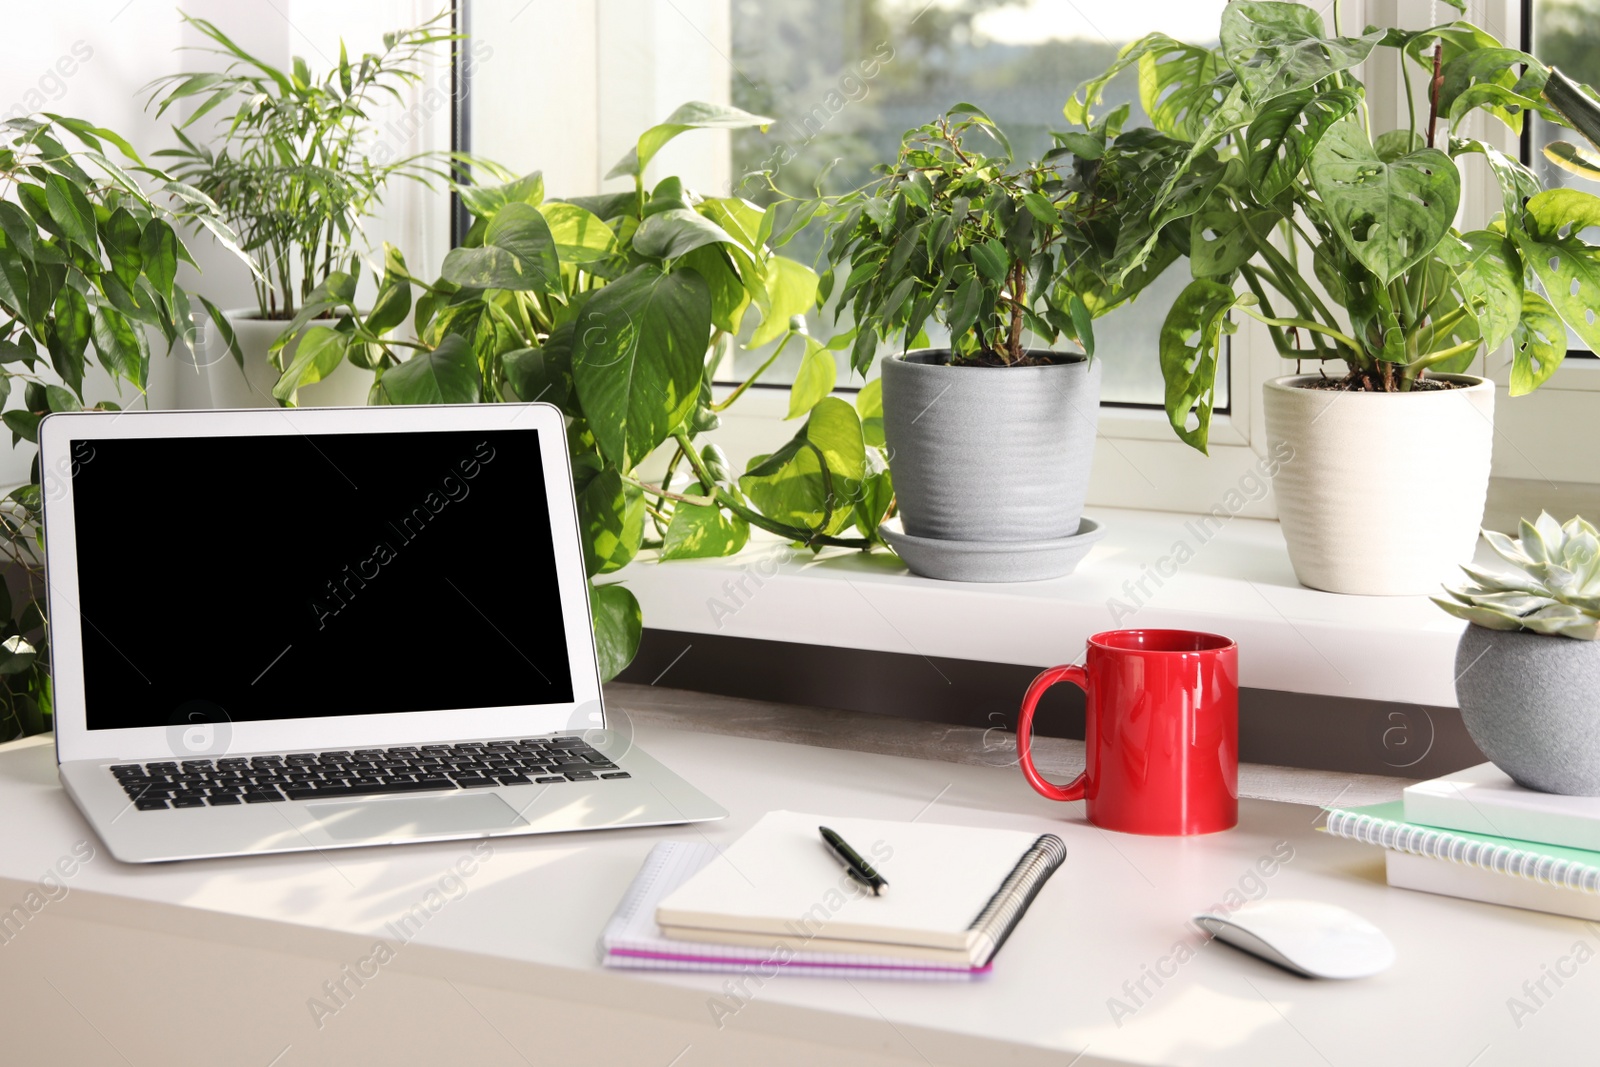 Photo of Laptop, red cup and notebooks on white desk near window sill with beautiful houseplants